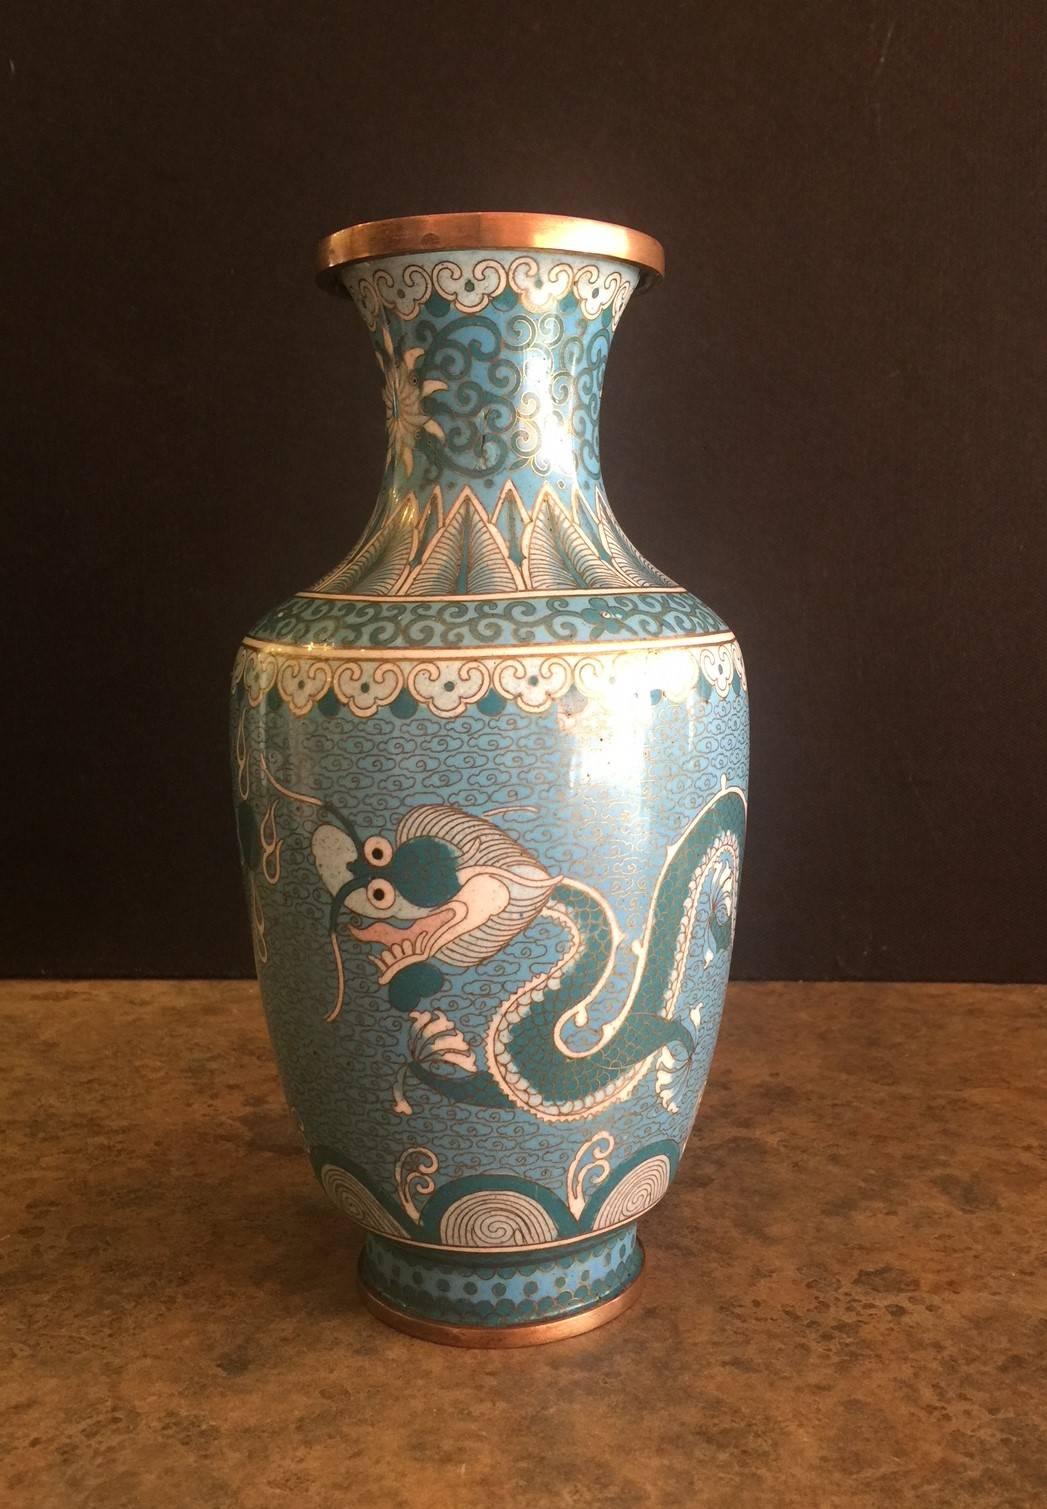 Smooth finish Chinese cloisonne dragon (5 toed Emperor) vase, circa 1930s (Republic). The piece is 9